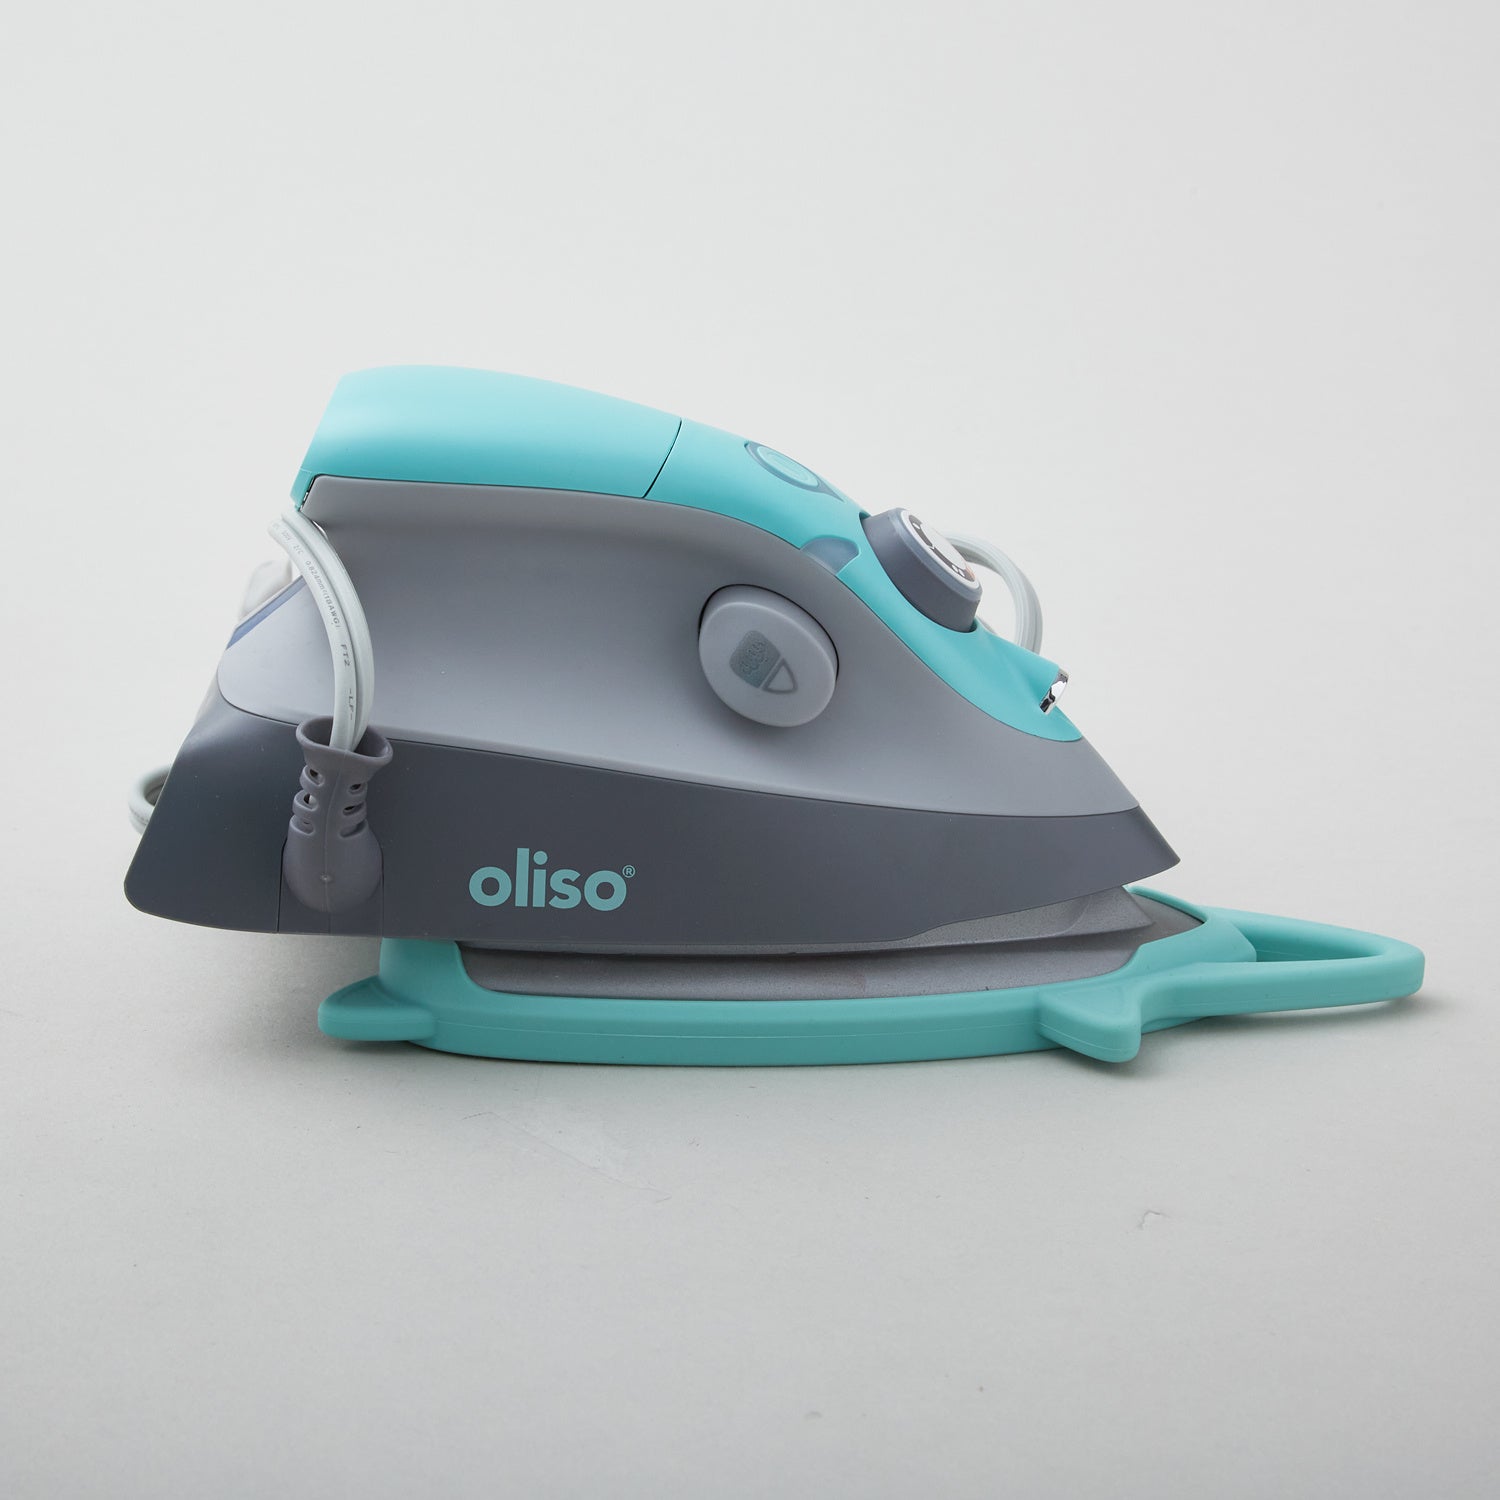 Oliso Mini Iron thoughts : r/quilting